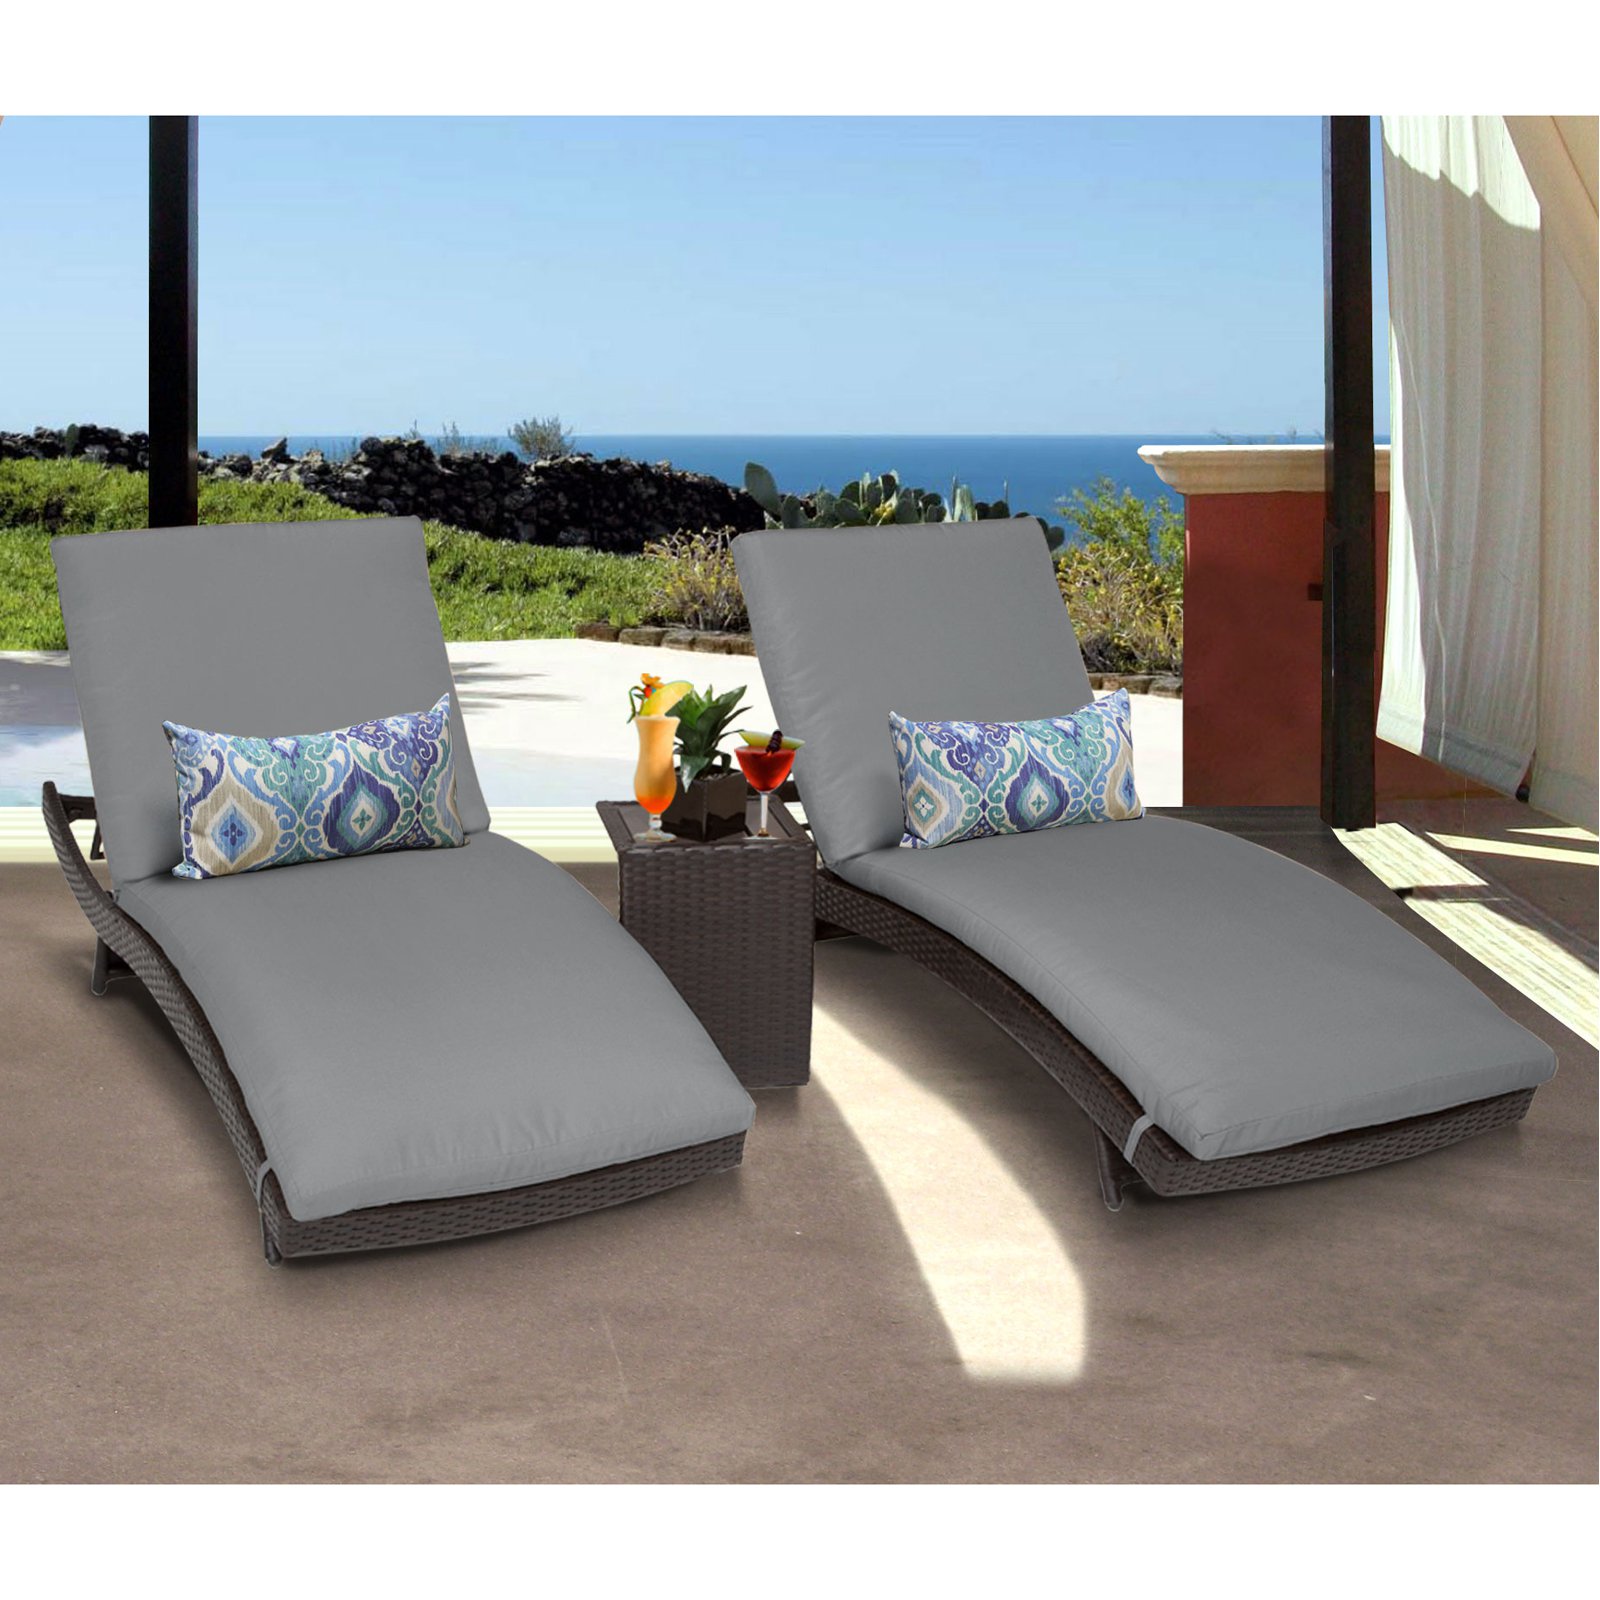 Barbados Curved Chaise Outdoor Wicker Patio Furniture in Cilantro (Set of 2) - image 4 of 4